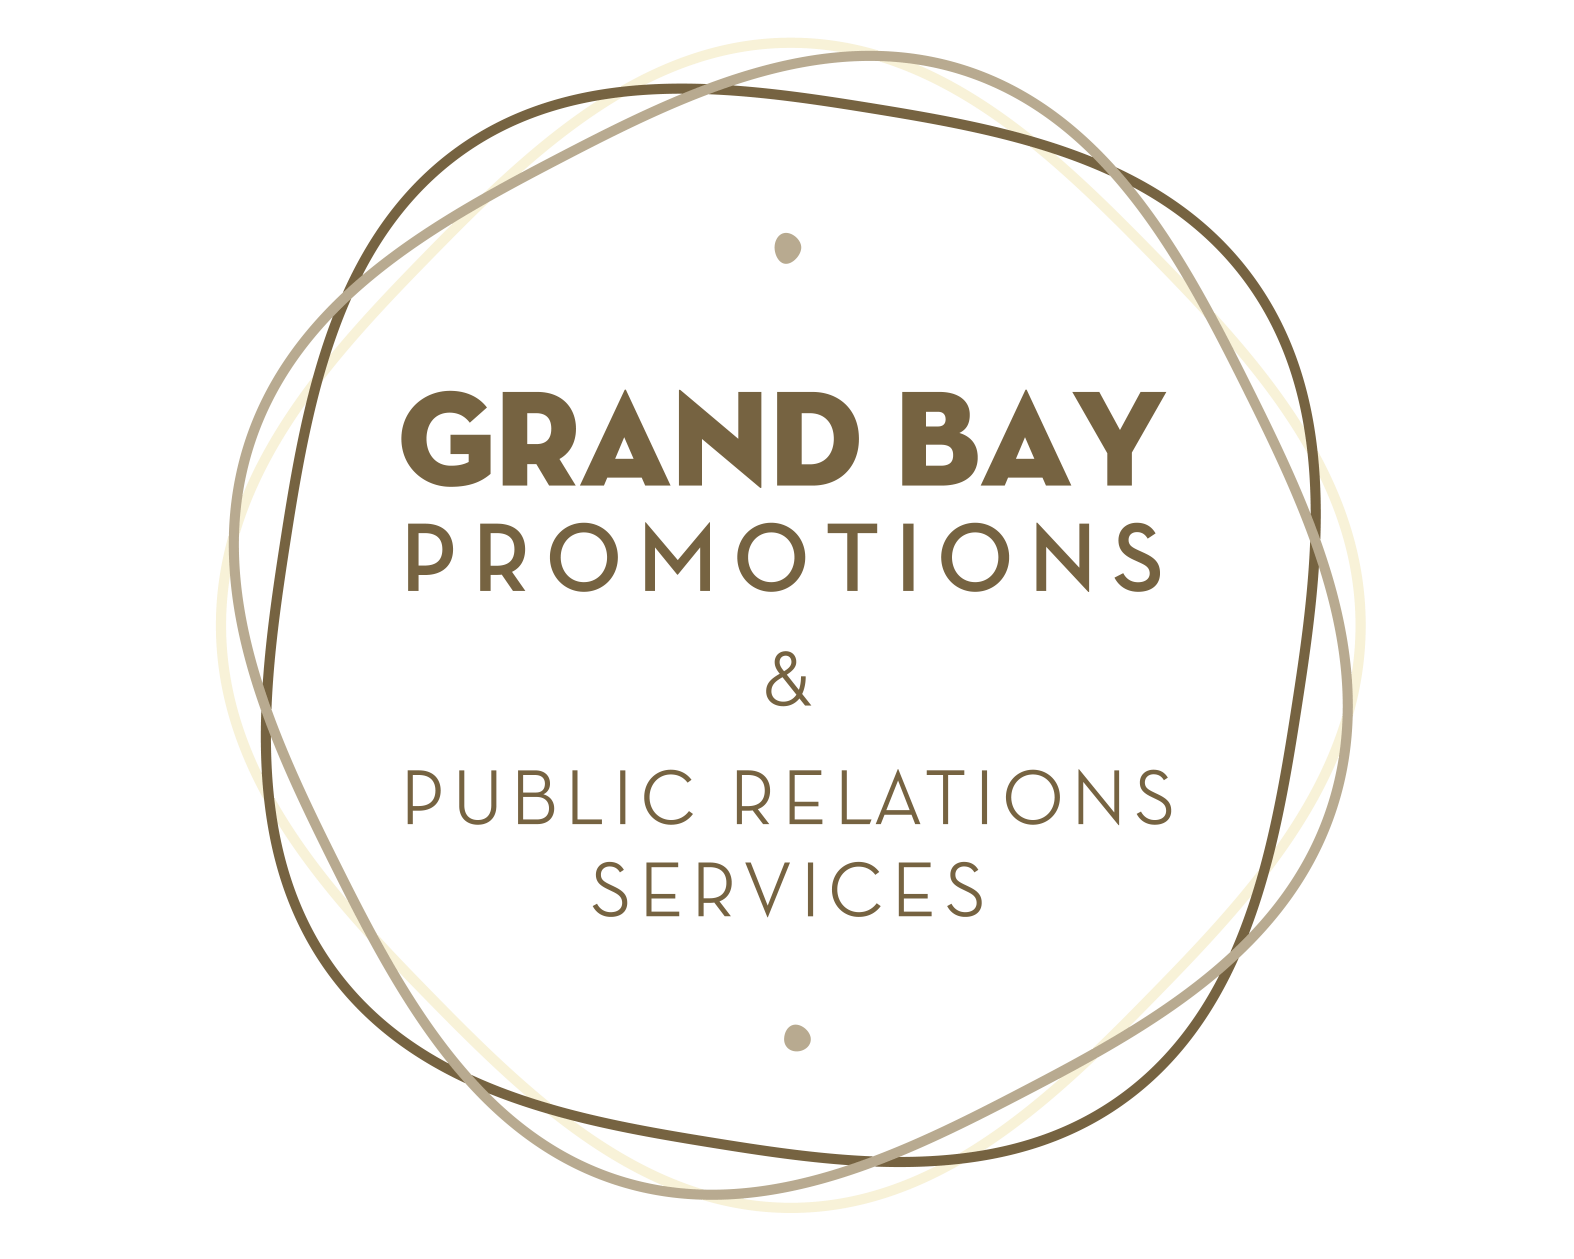 Grand Bay Promotions logo